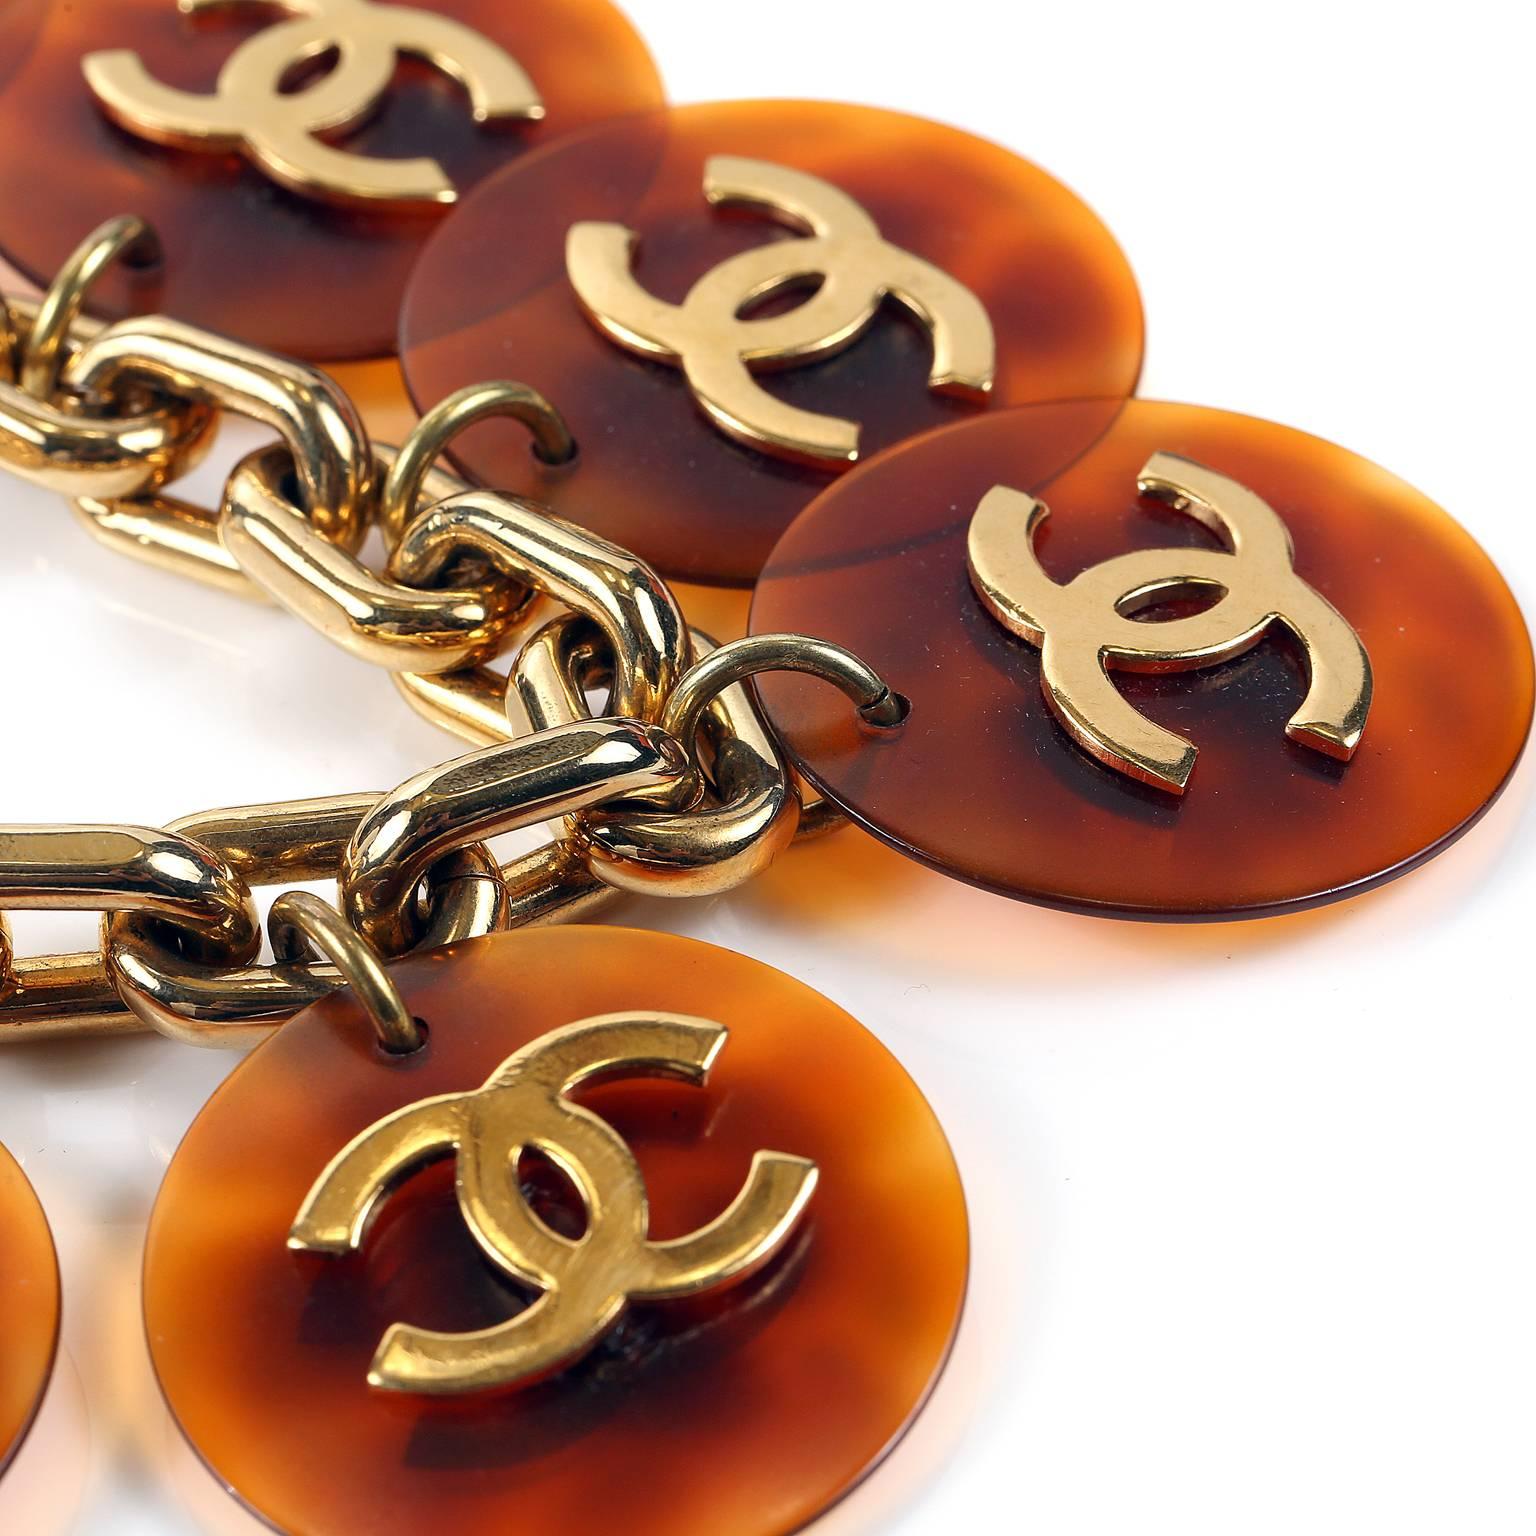 Chanel Tortoise Resin CC Disc Bracelet - Excellent
Gold oval link bracelet has resin tortoise coin discs, each with a gold interlocking CC on it.  Please note: one disc is missing the CC.  Toggle closure.
A207
